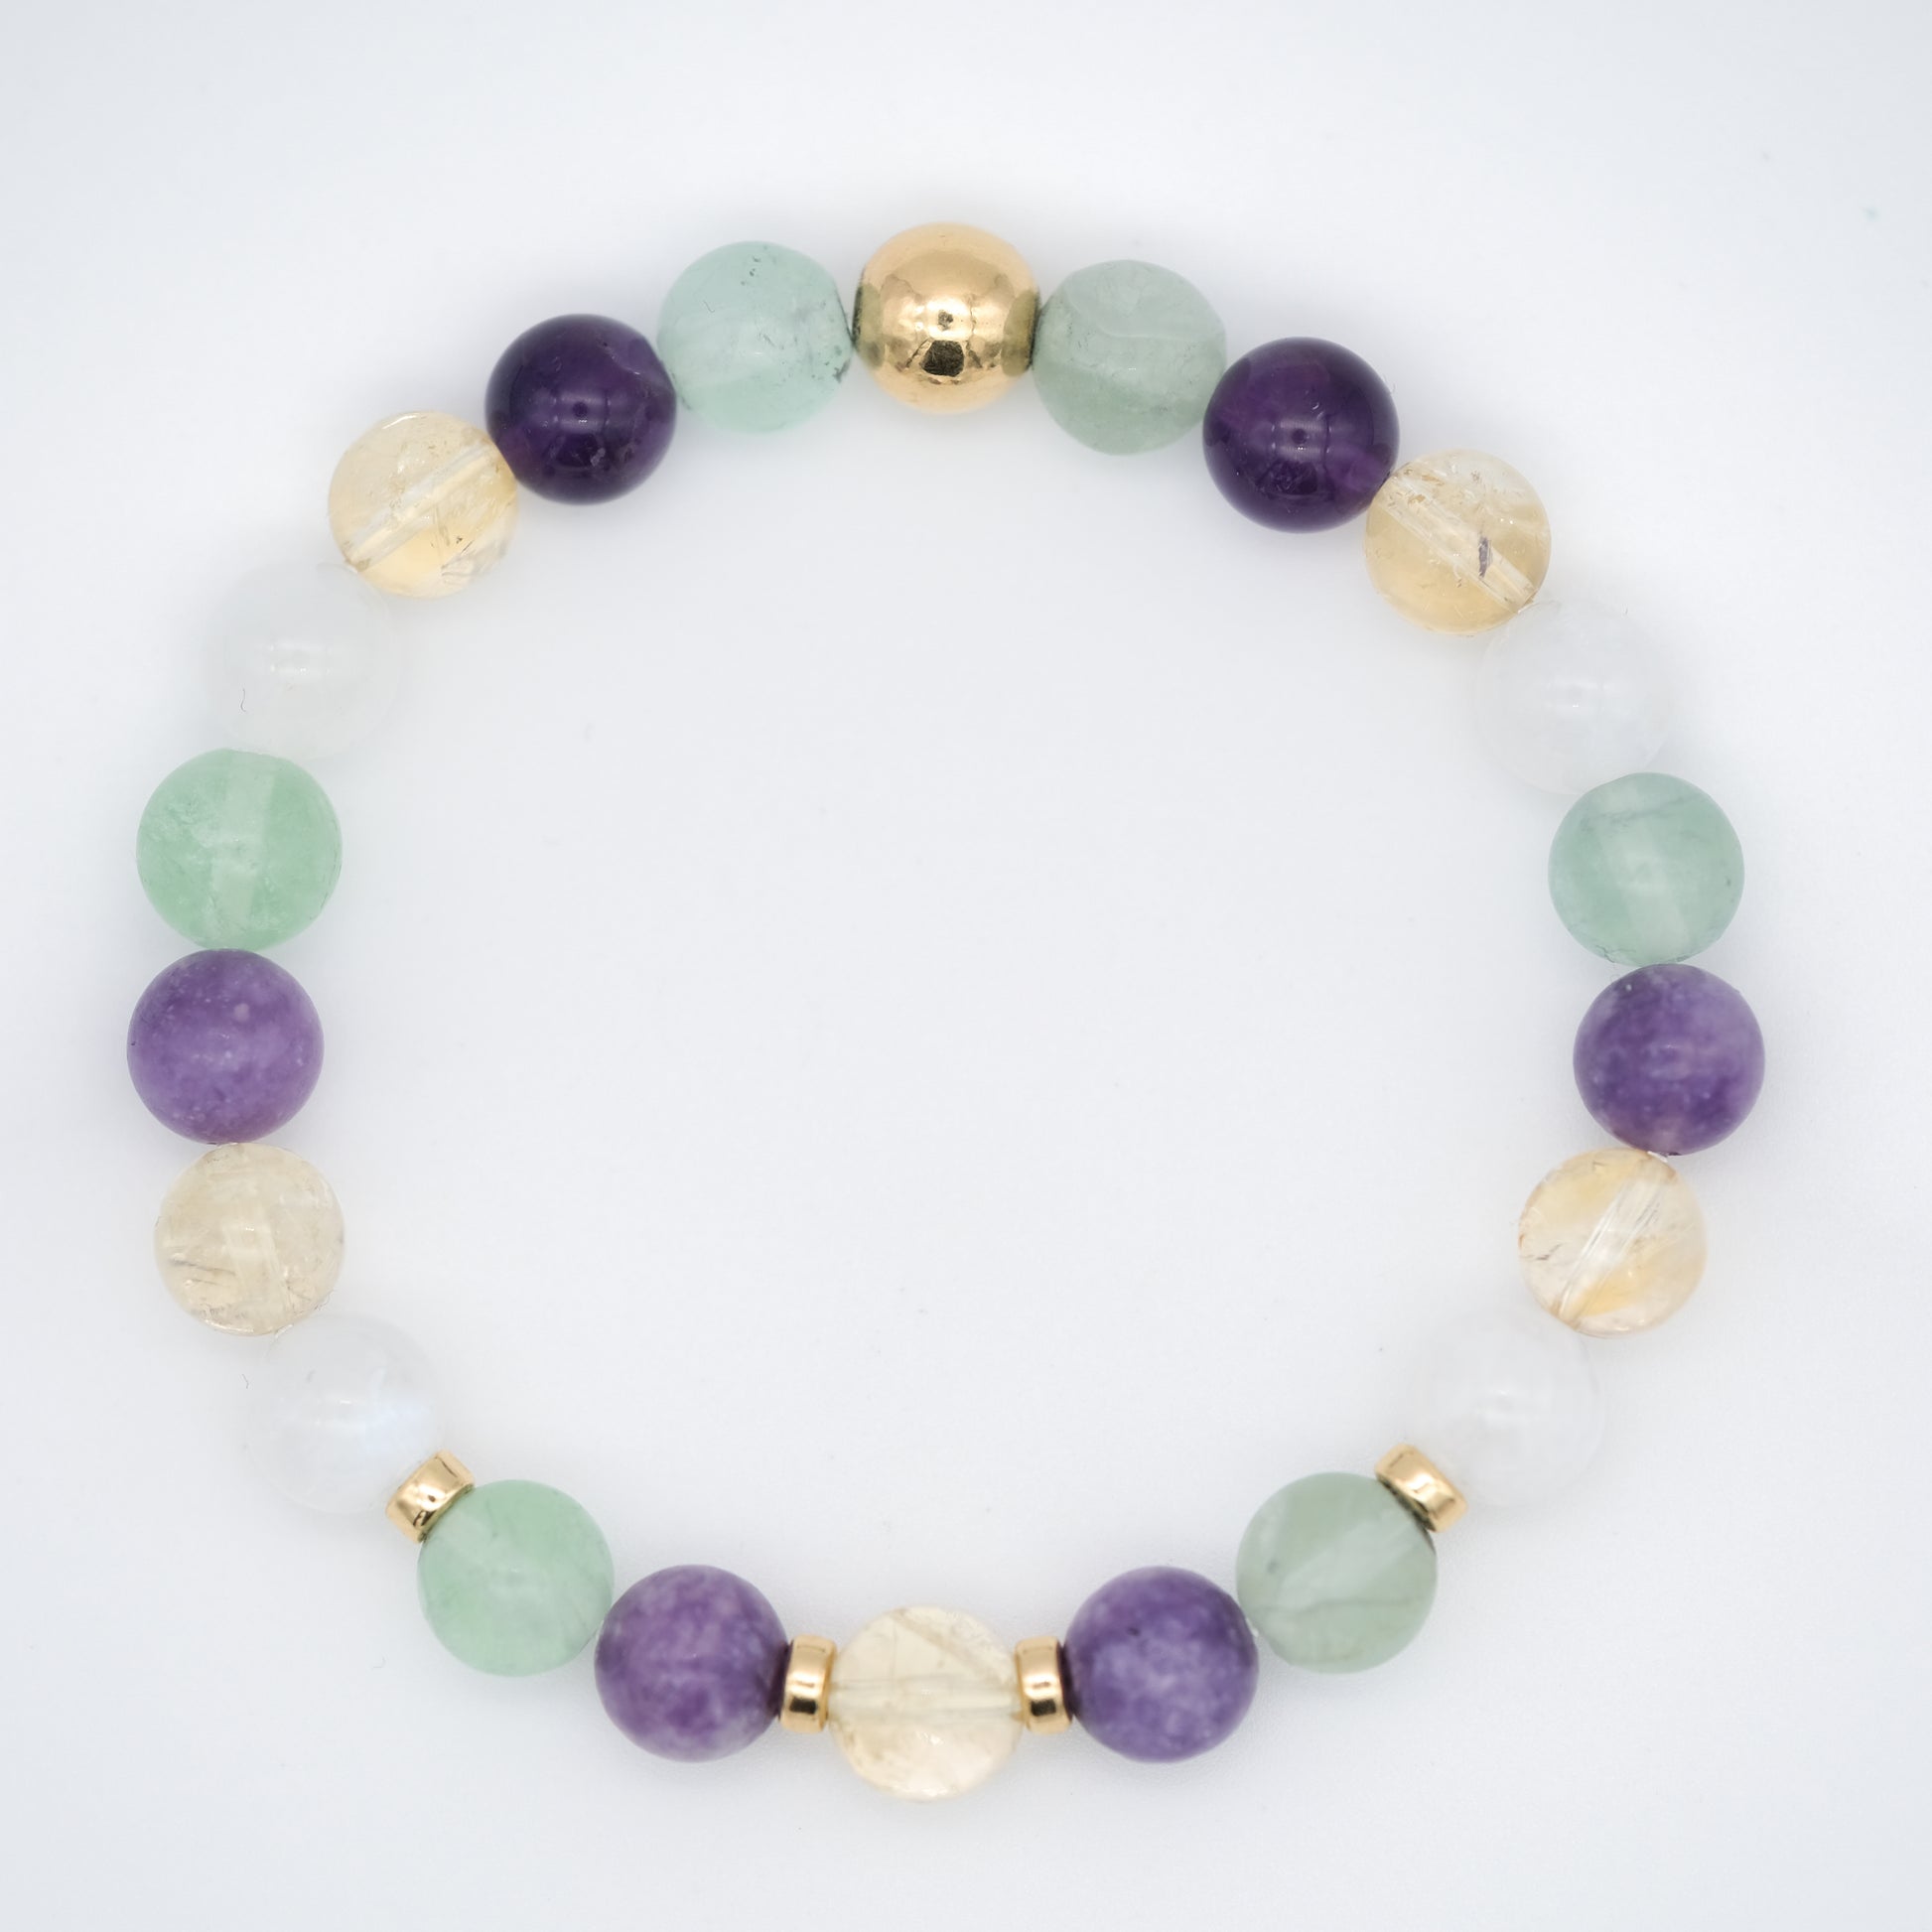 Samayla menopause gemstone bracelet in 8mm beads with gold filled accessories from above